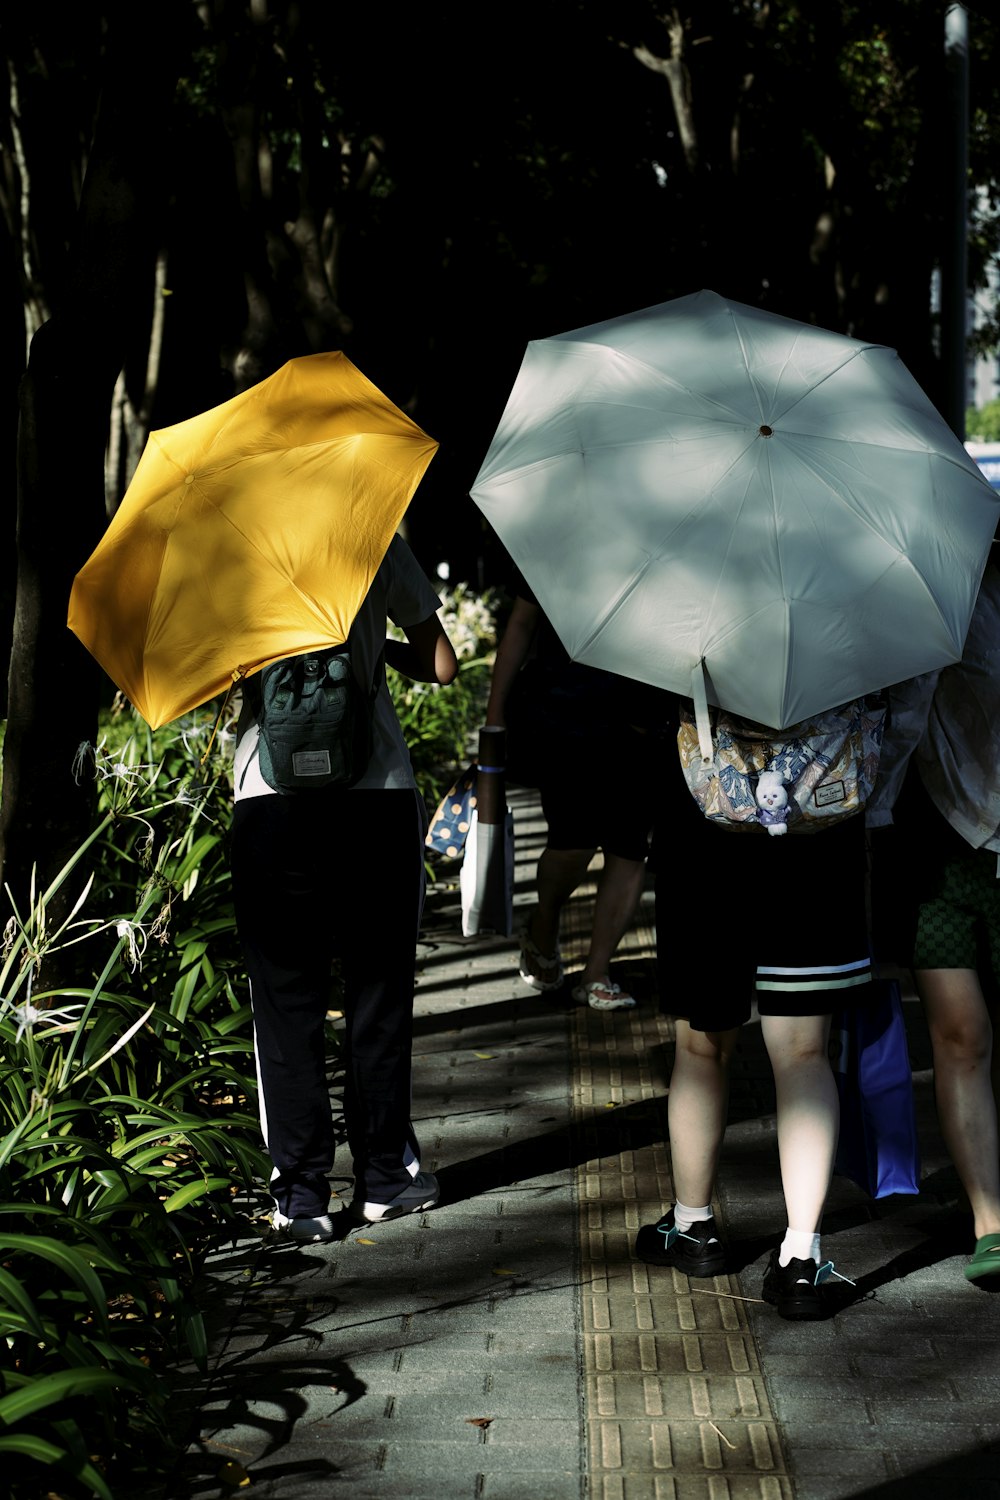 a group of people walking down a sidewalk holding umbrellas